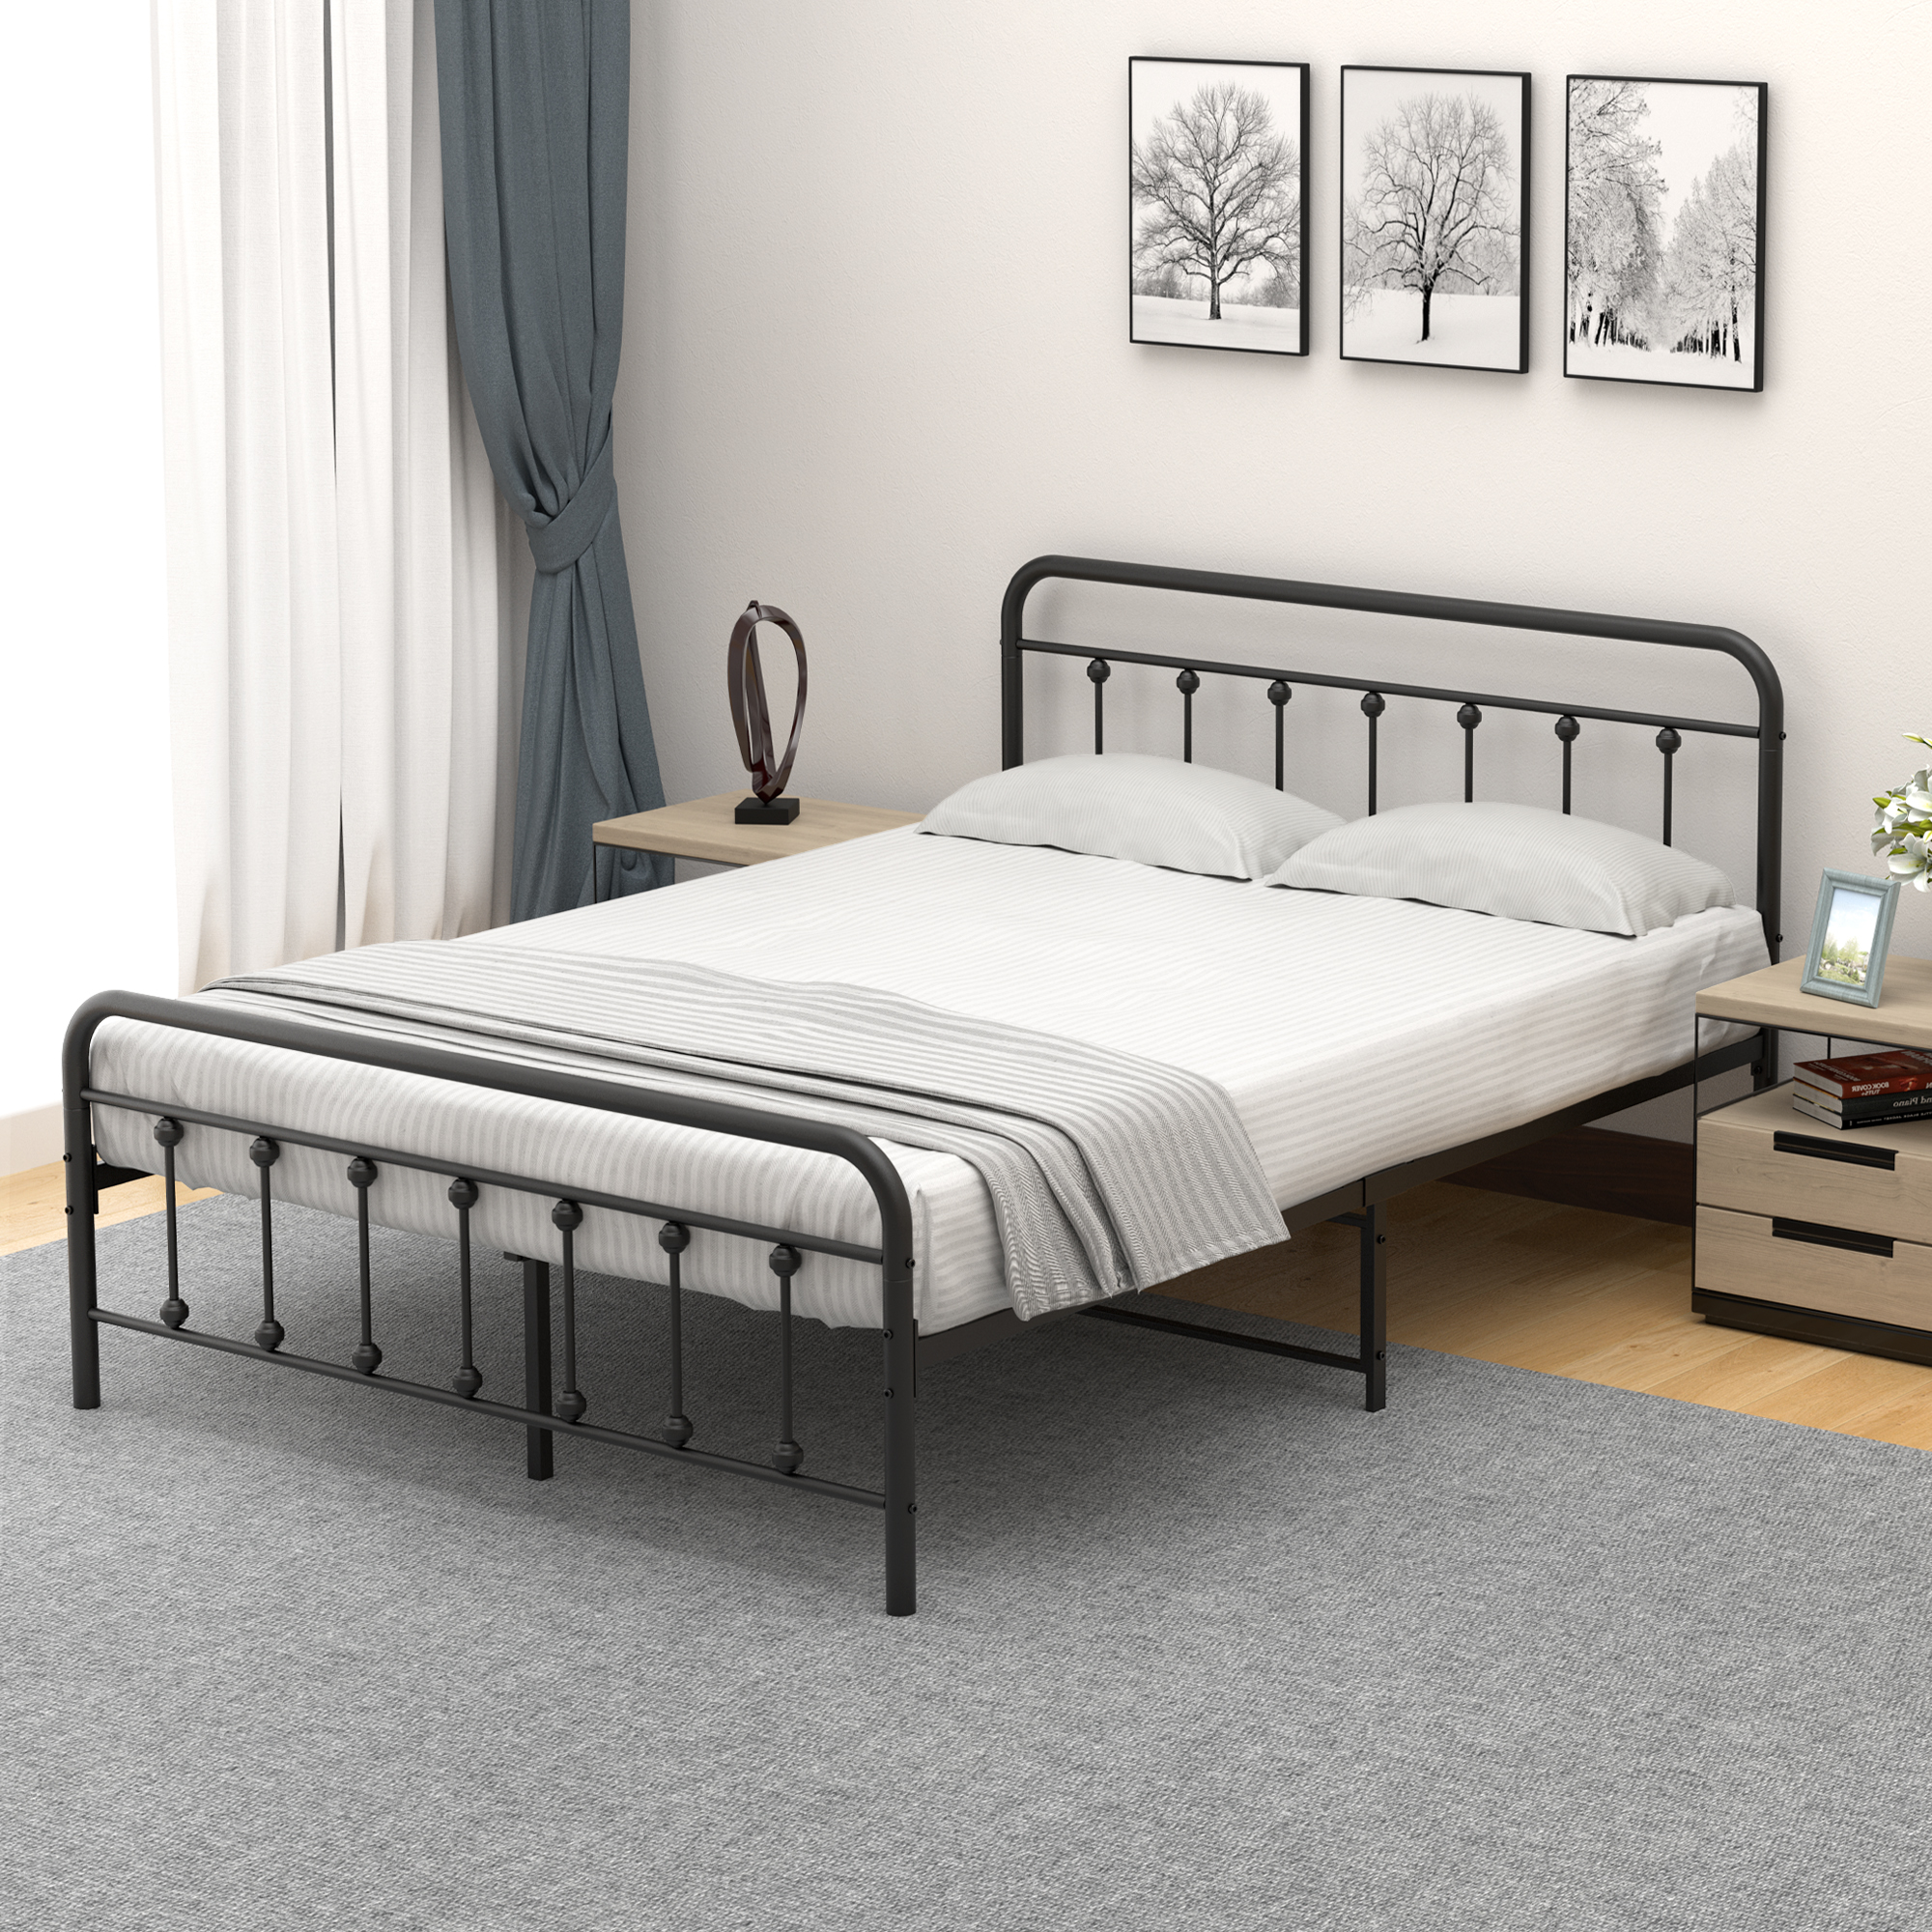 [US Direct] IDEALHOUSE Queen Size Metal Bed Frame with Victorian Headboard